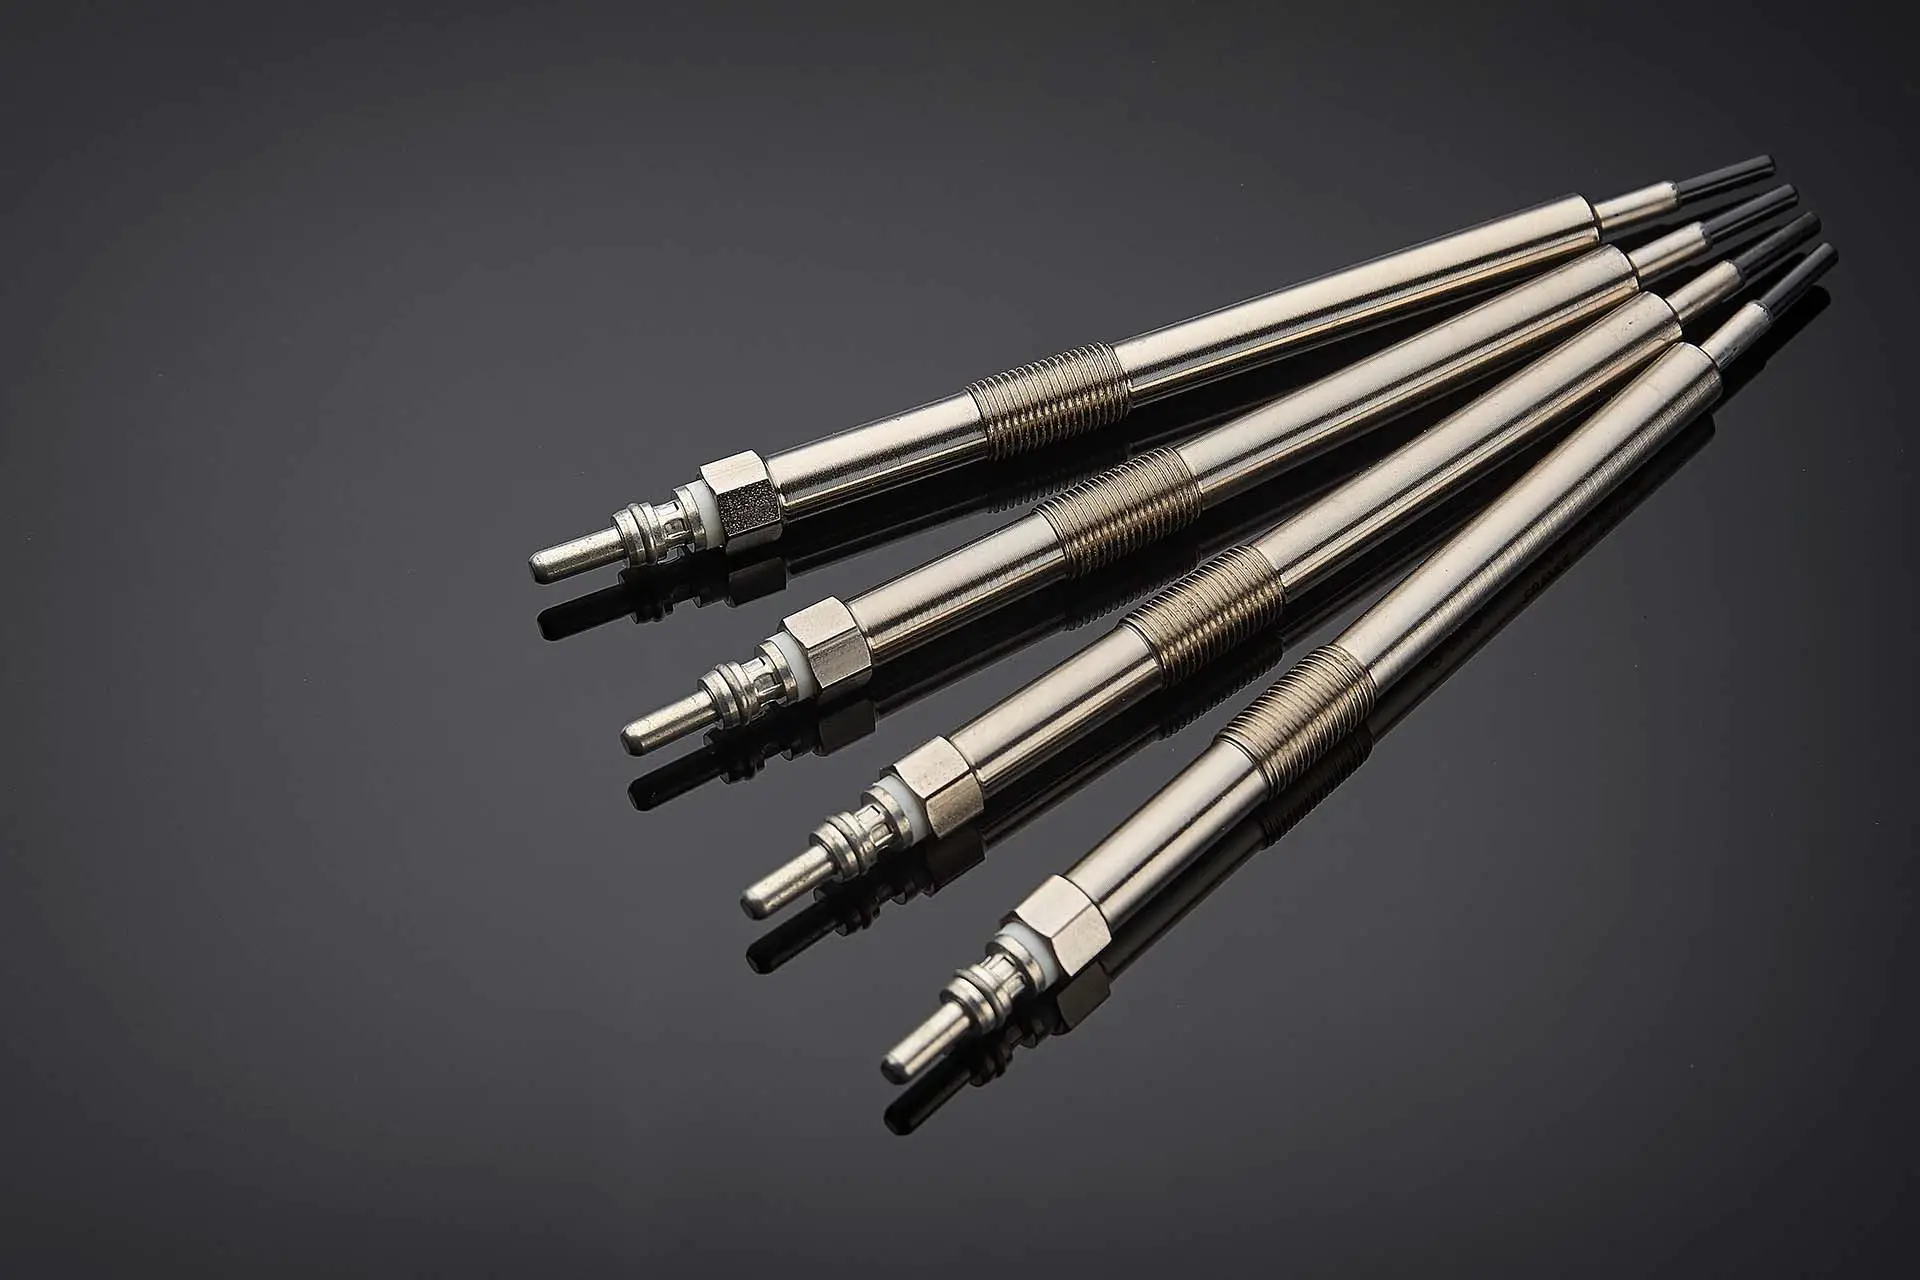 Four glow plugs for the diesel engine lie on a dark background, prepared for the next service